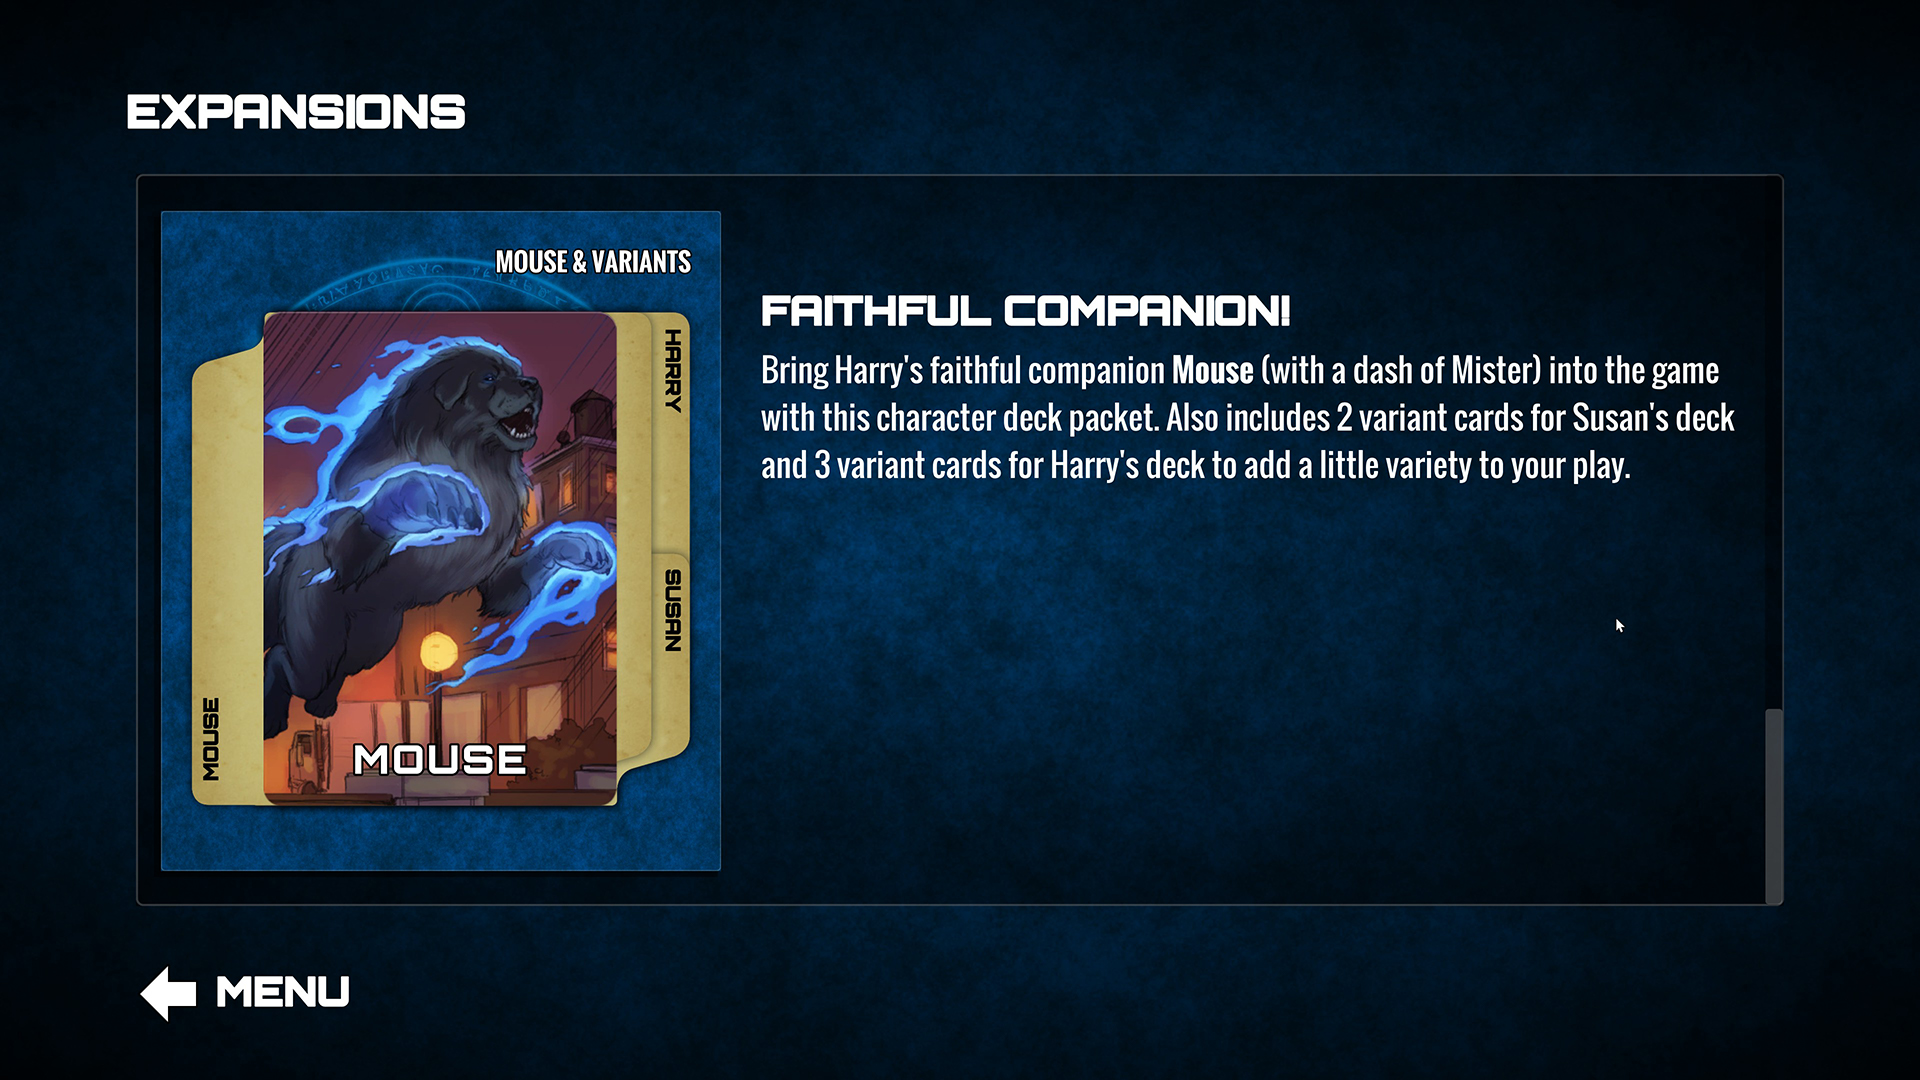 Dresden Files Cooperative Card Game - Mouse & Variants Featured Screenshot #1